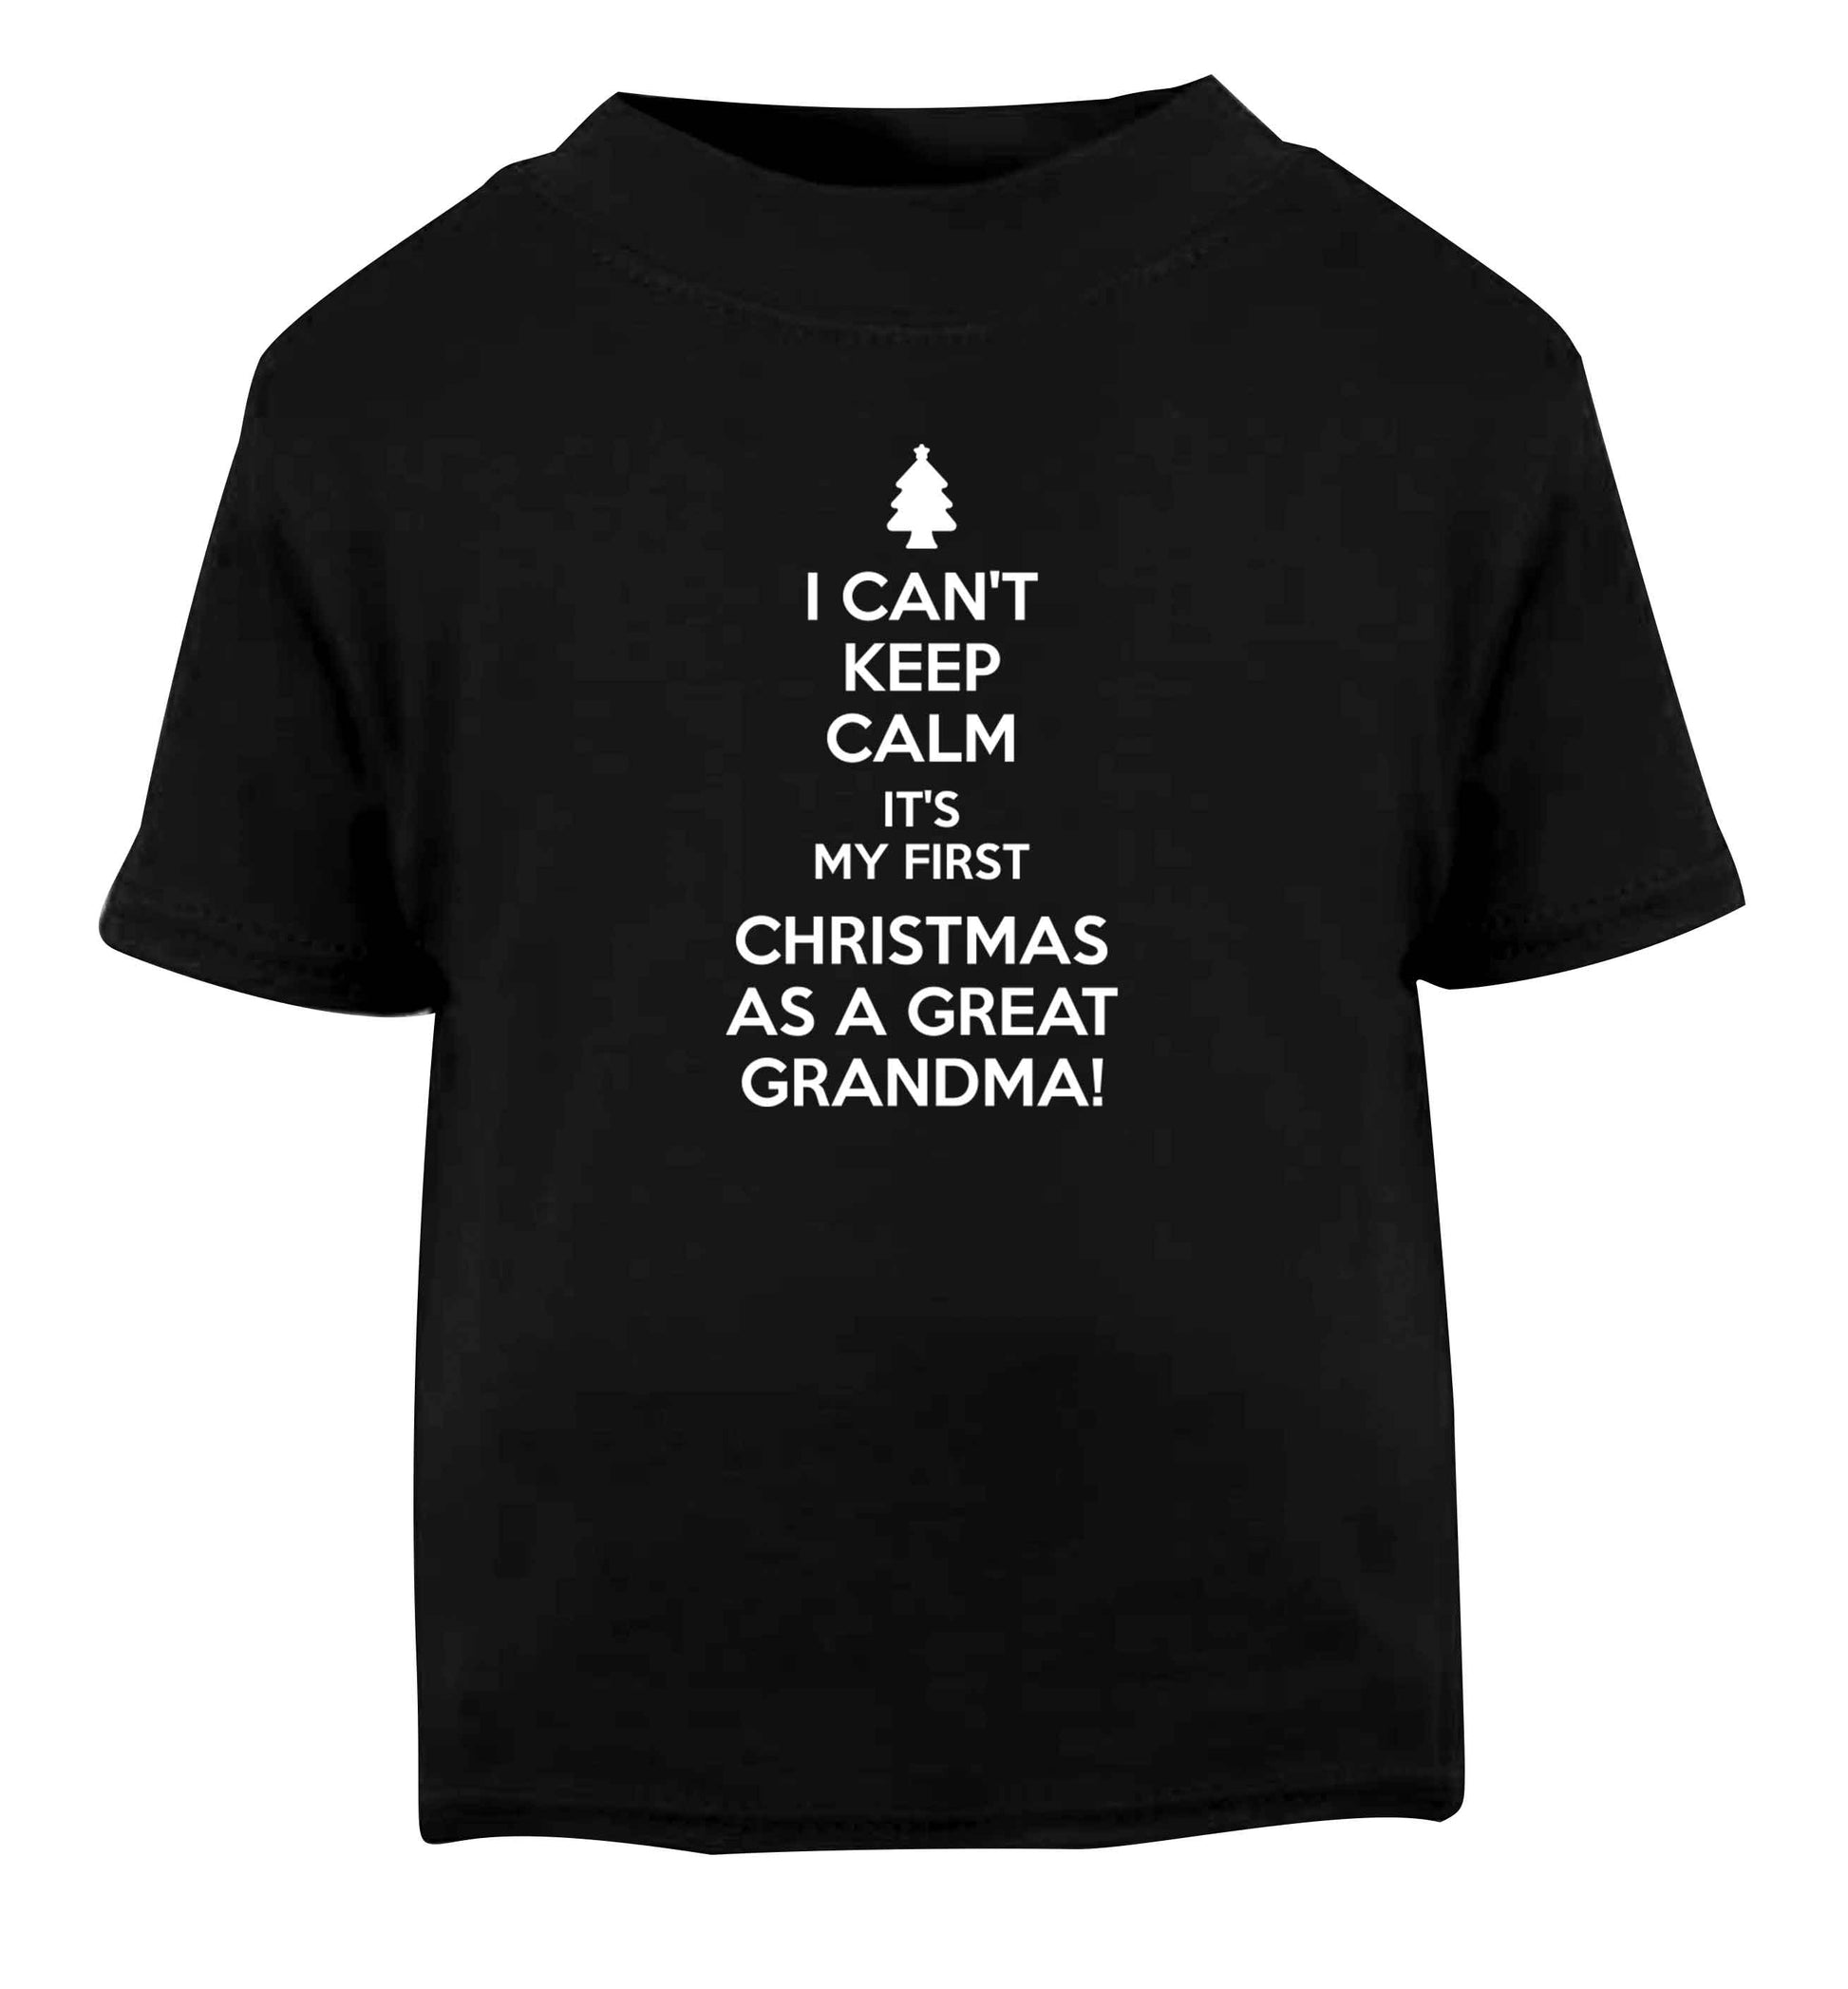 I can't keep calm it's my first Christmas as a great grandma! Black Baby Toddler Tshirt 2 years